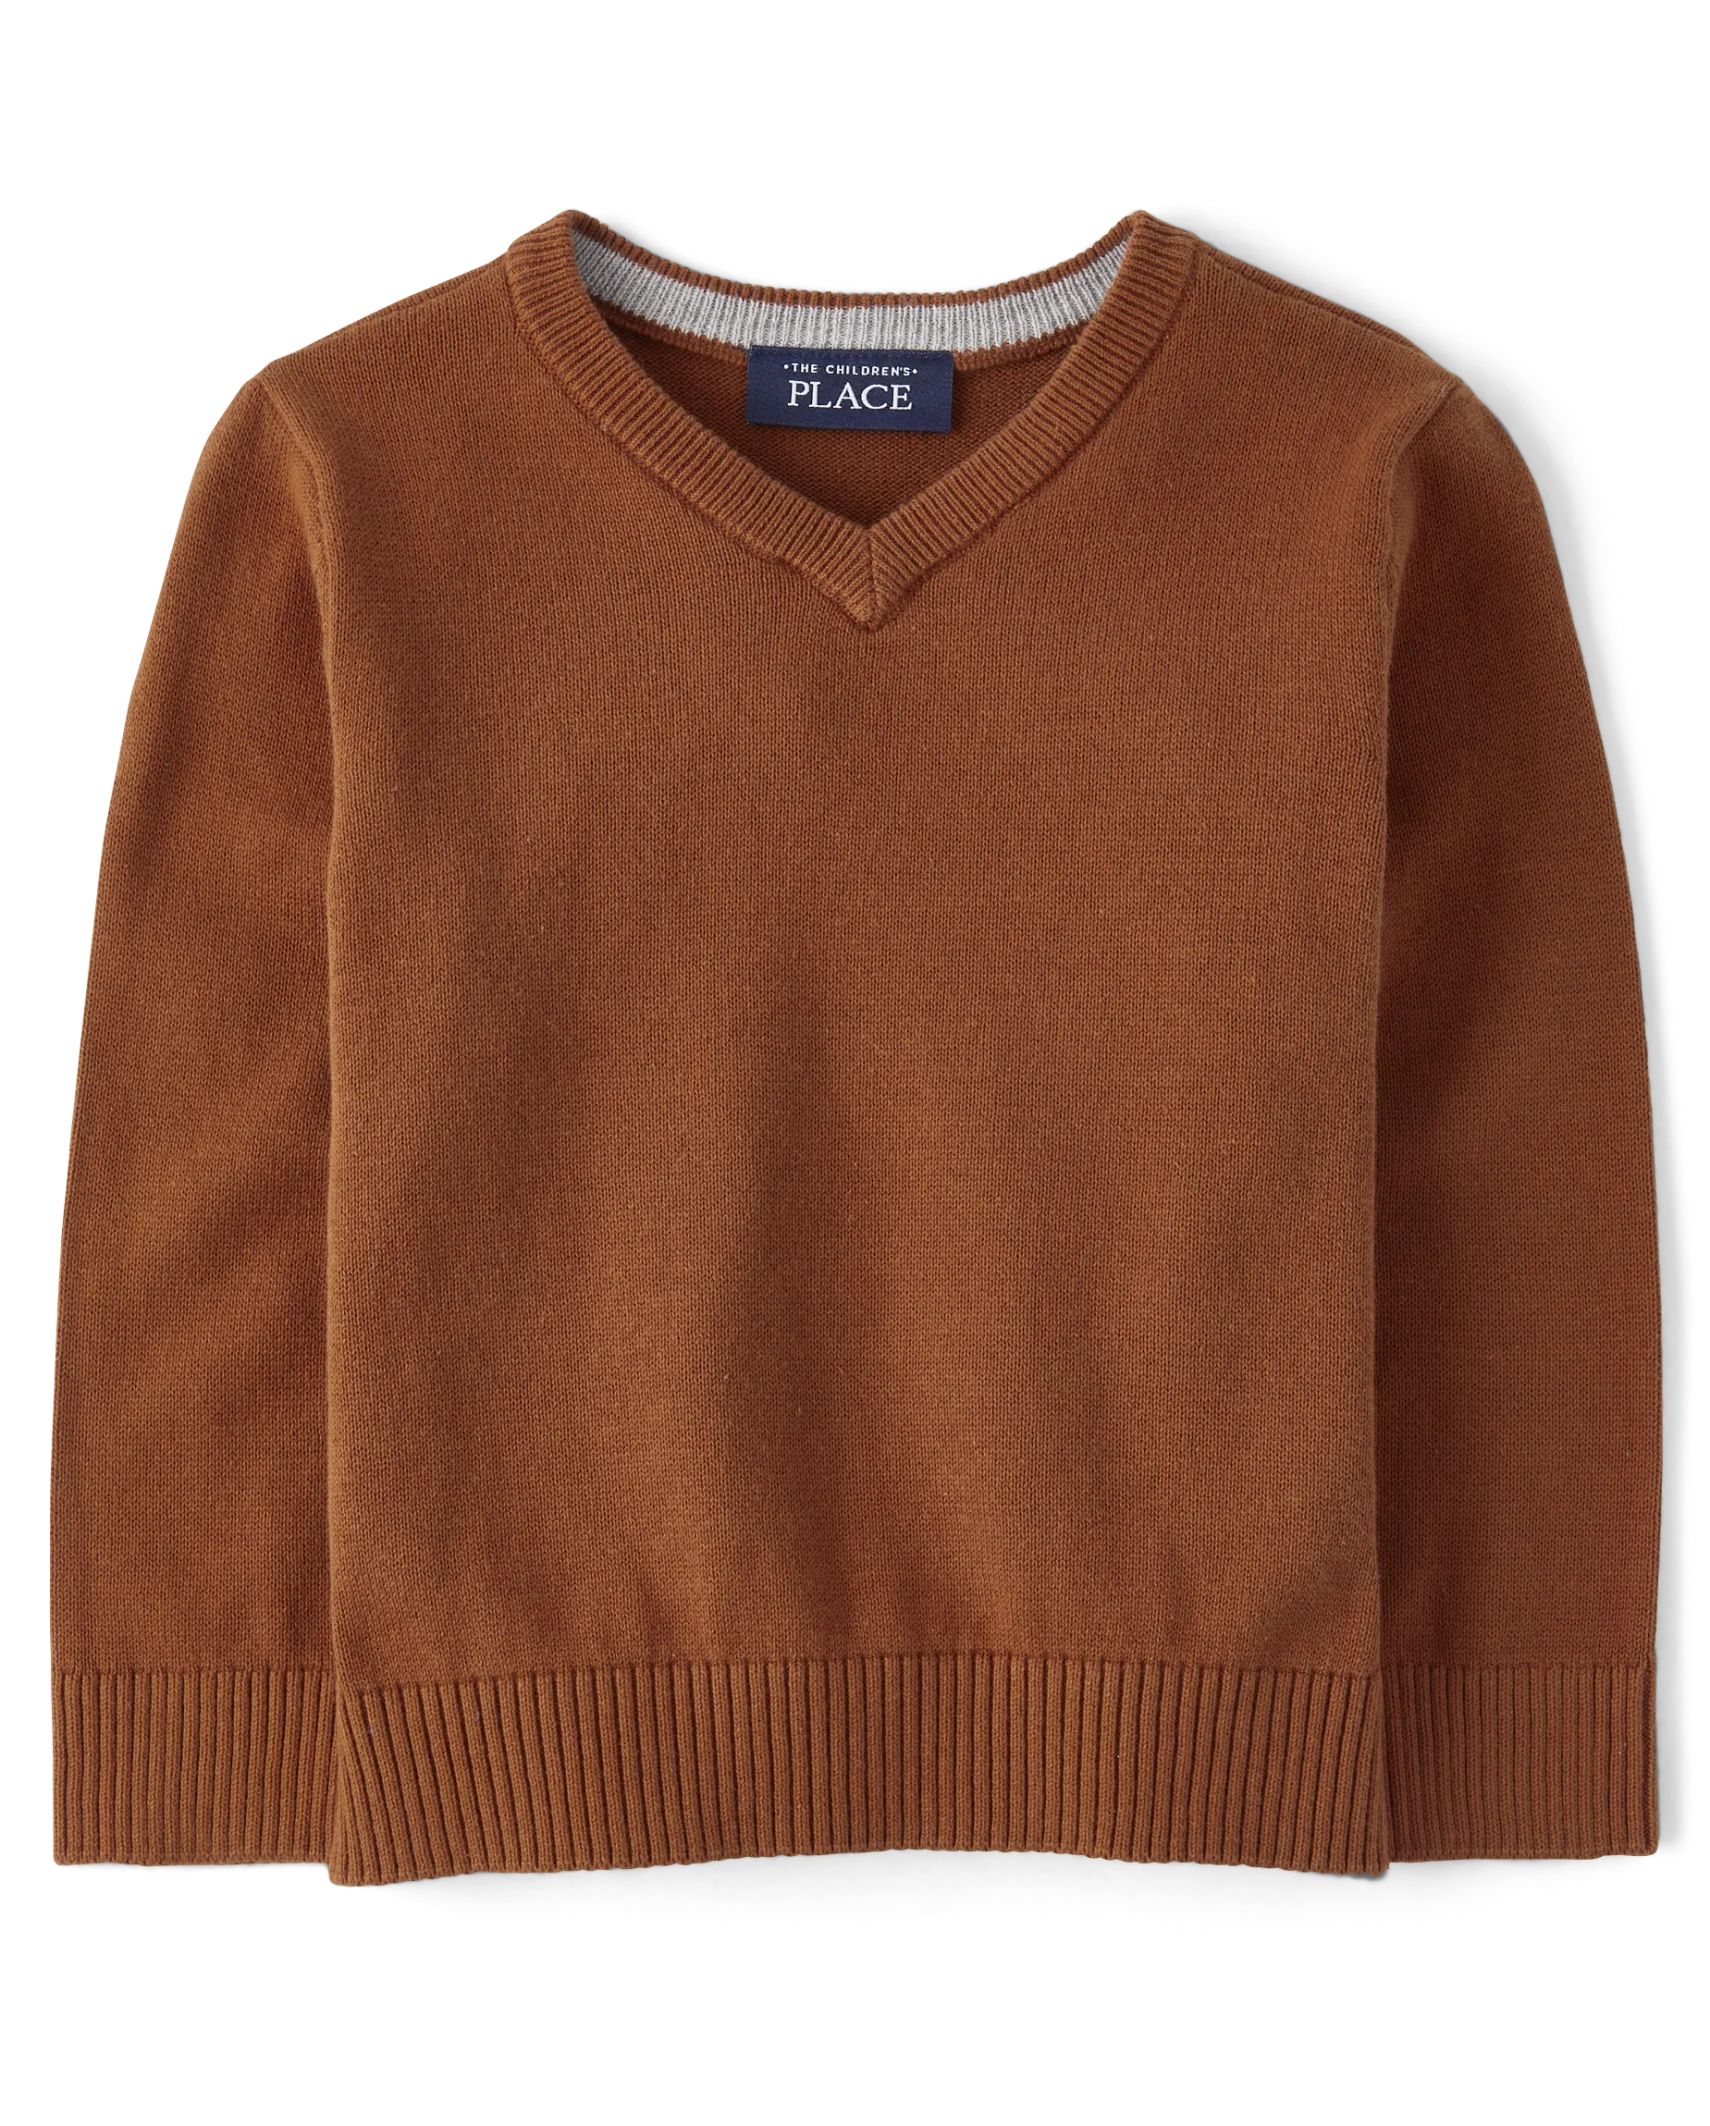 Baby And Toddler Boys V Neck Sweater - ginger bread | The Children's Place